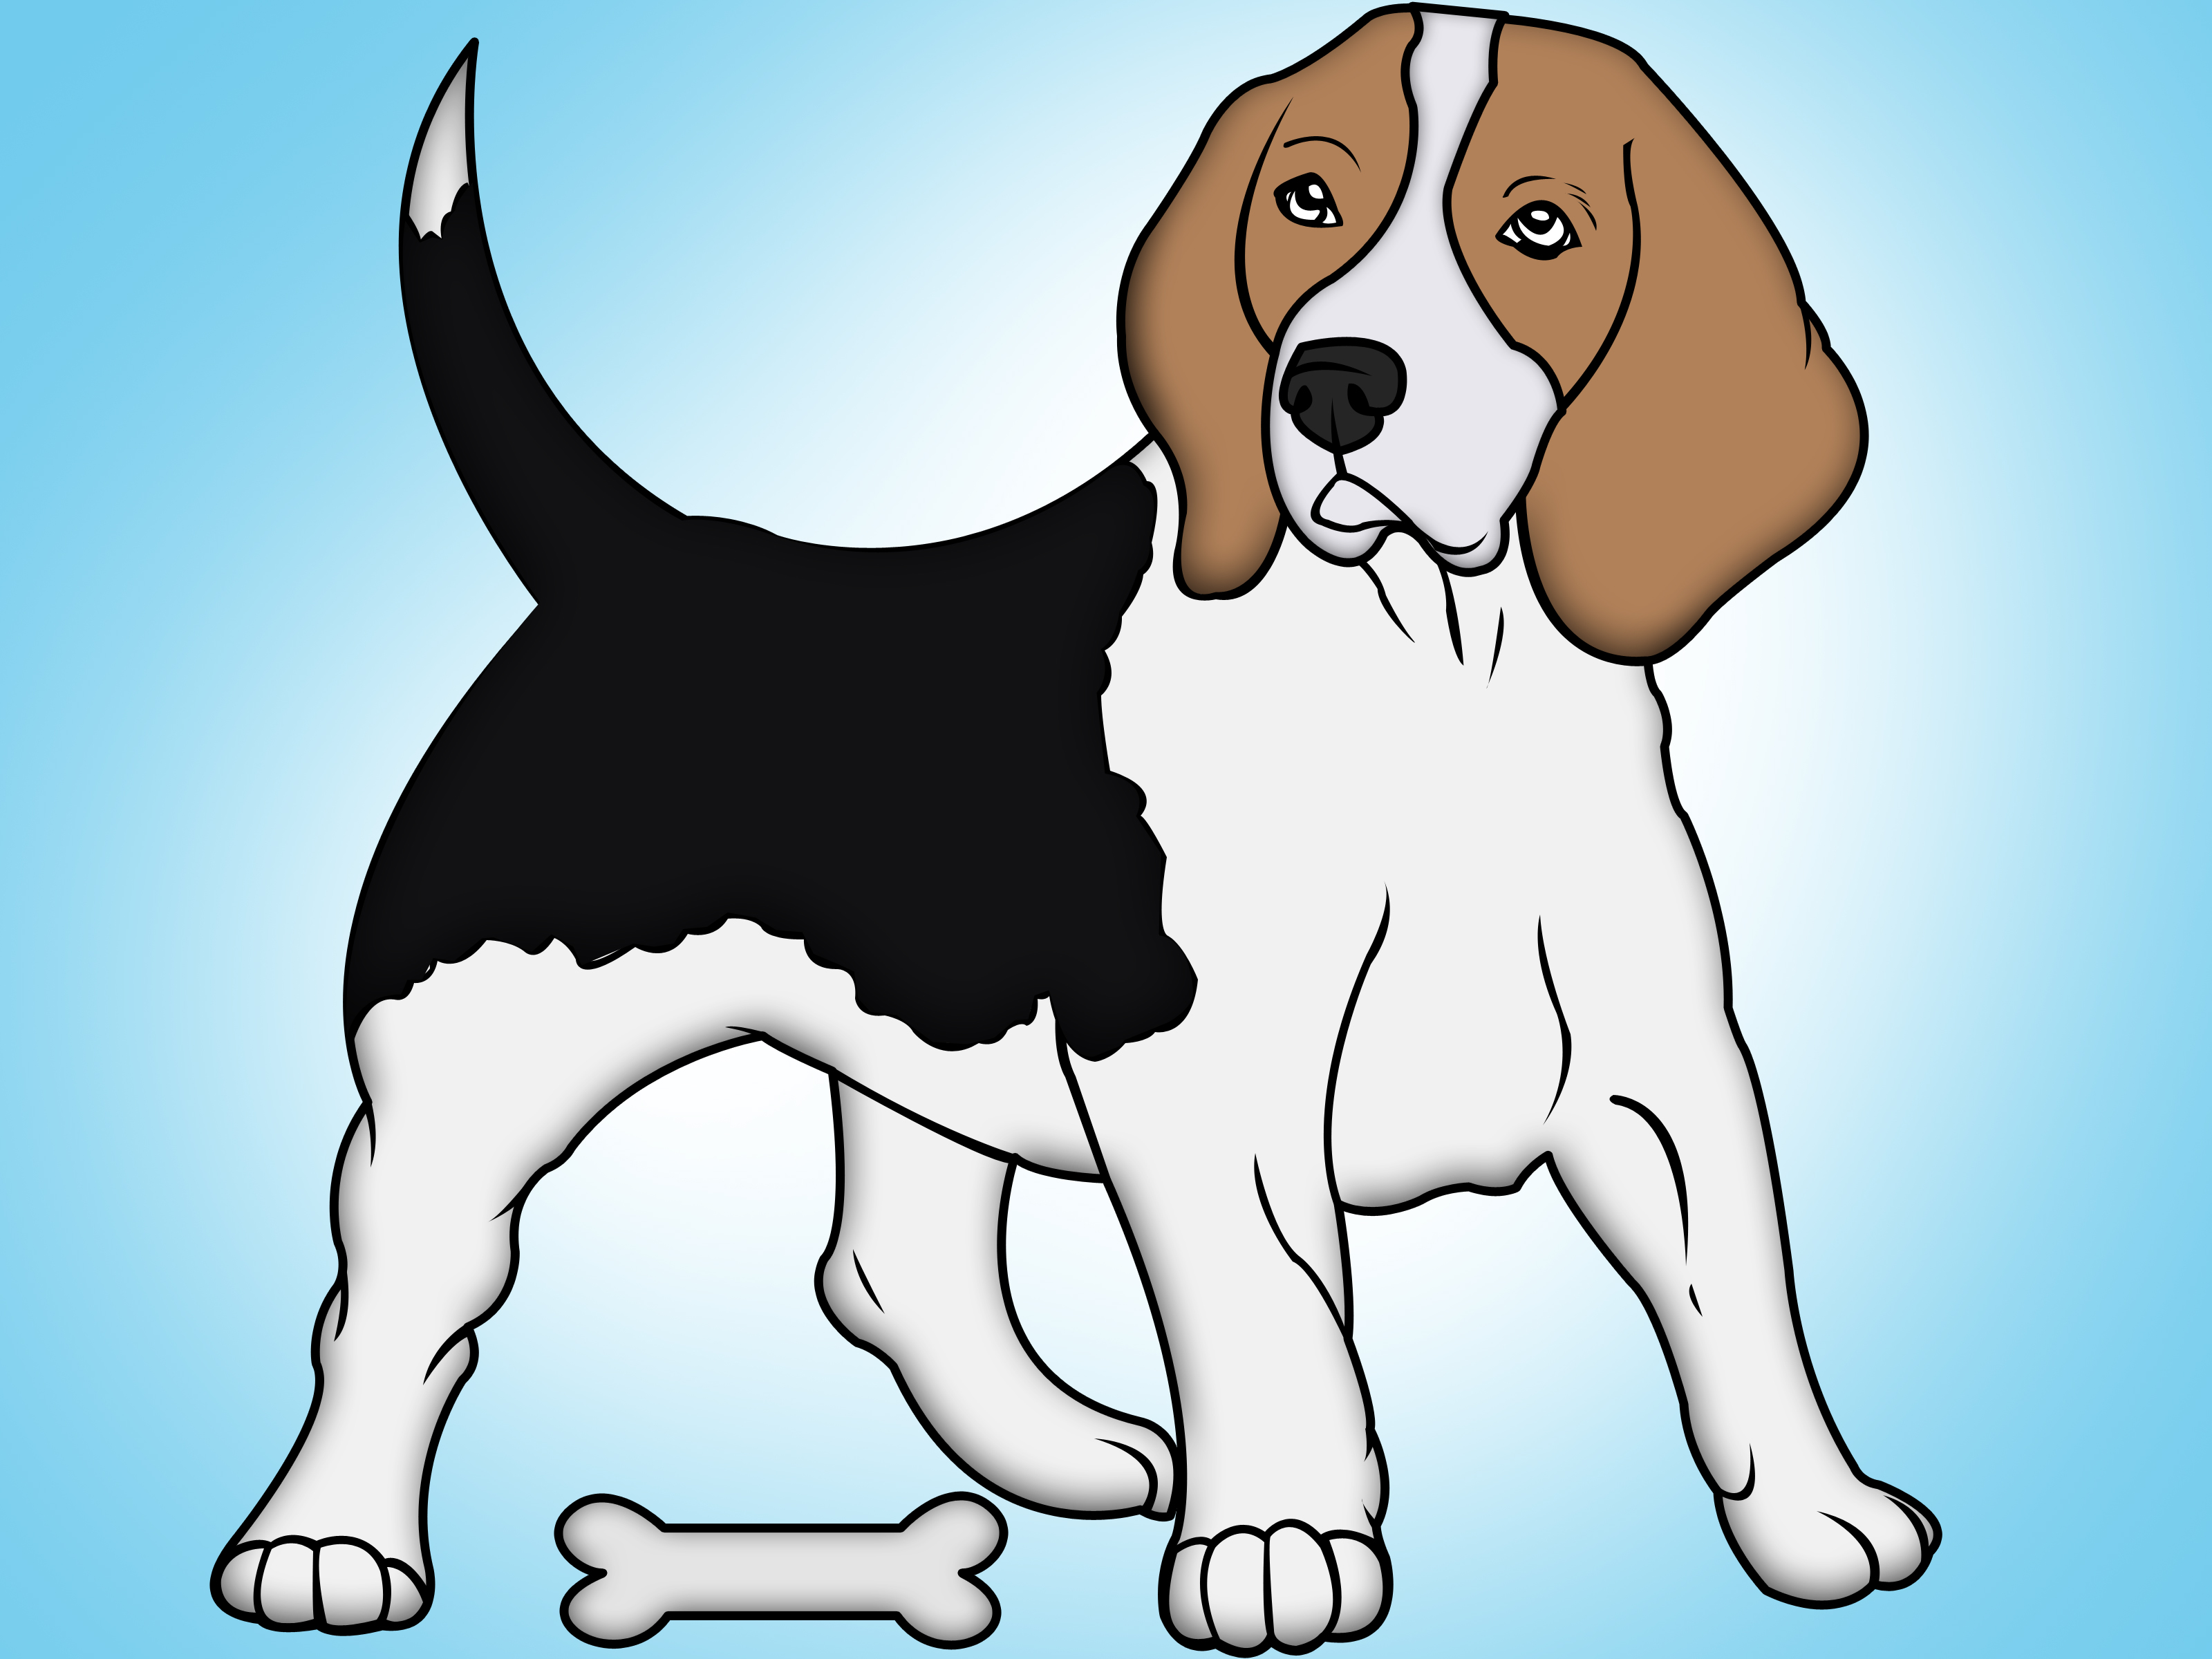 Drawing Dogs - how to articles from wikiHow